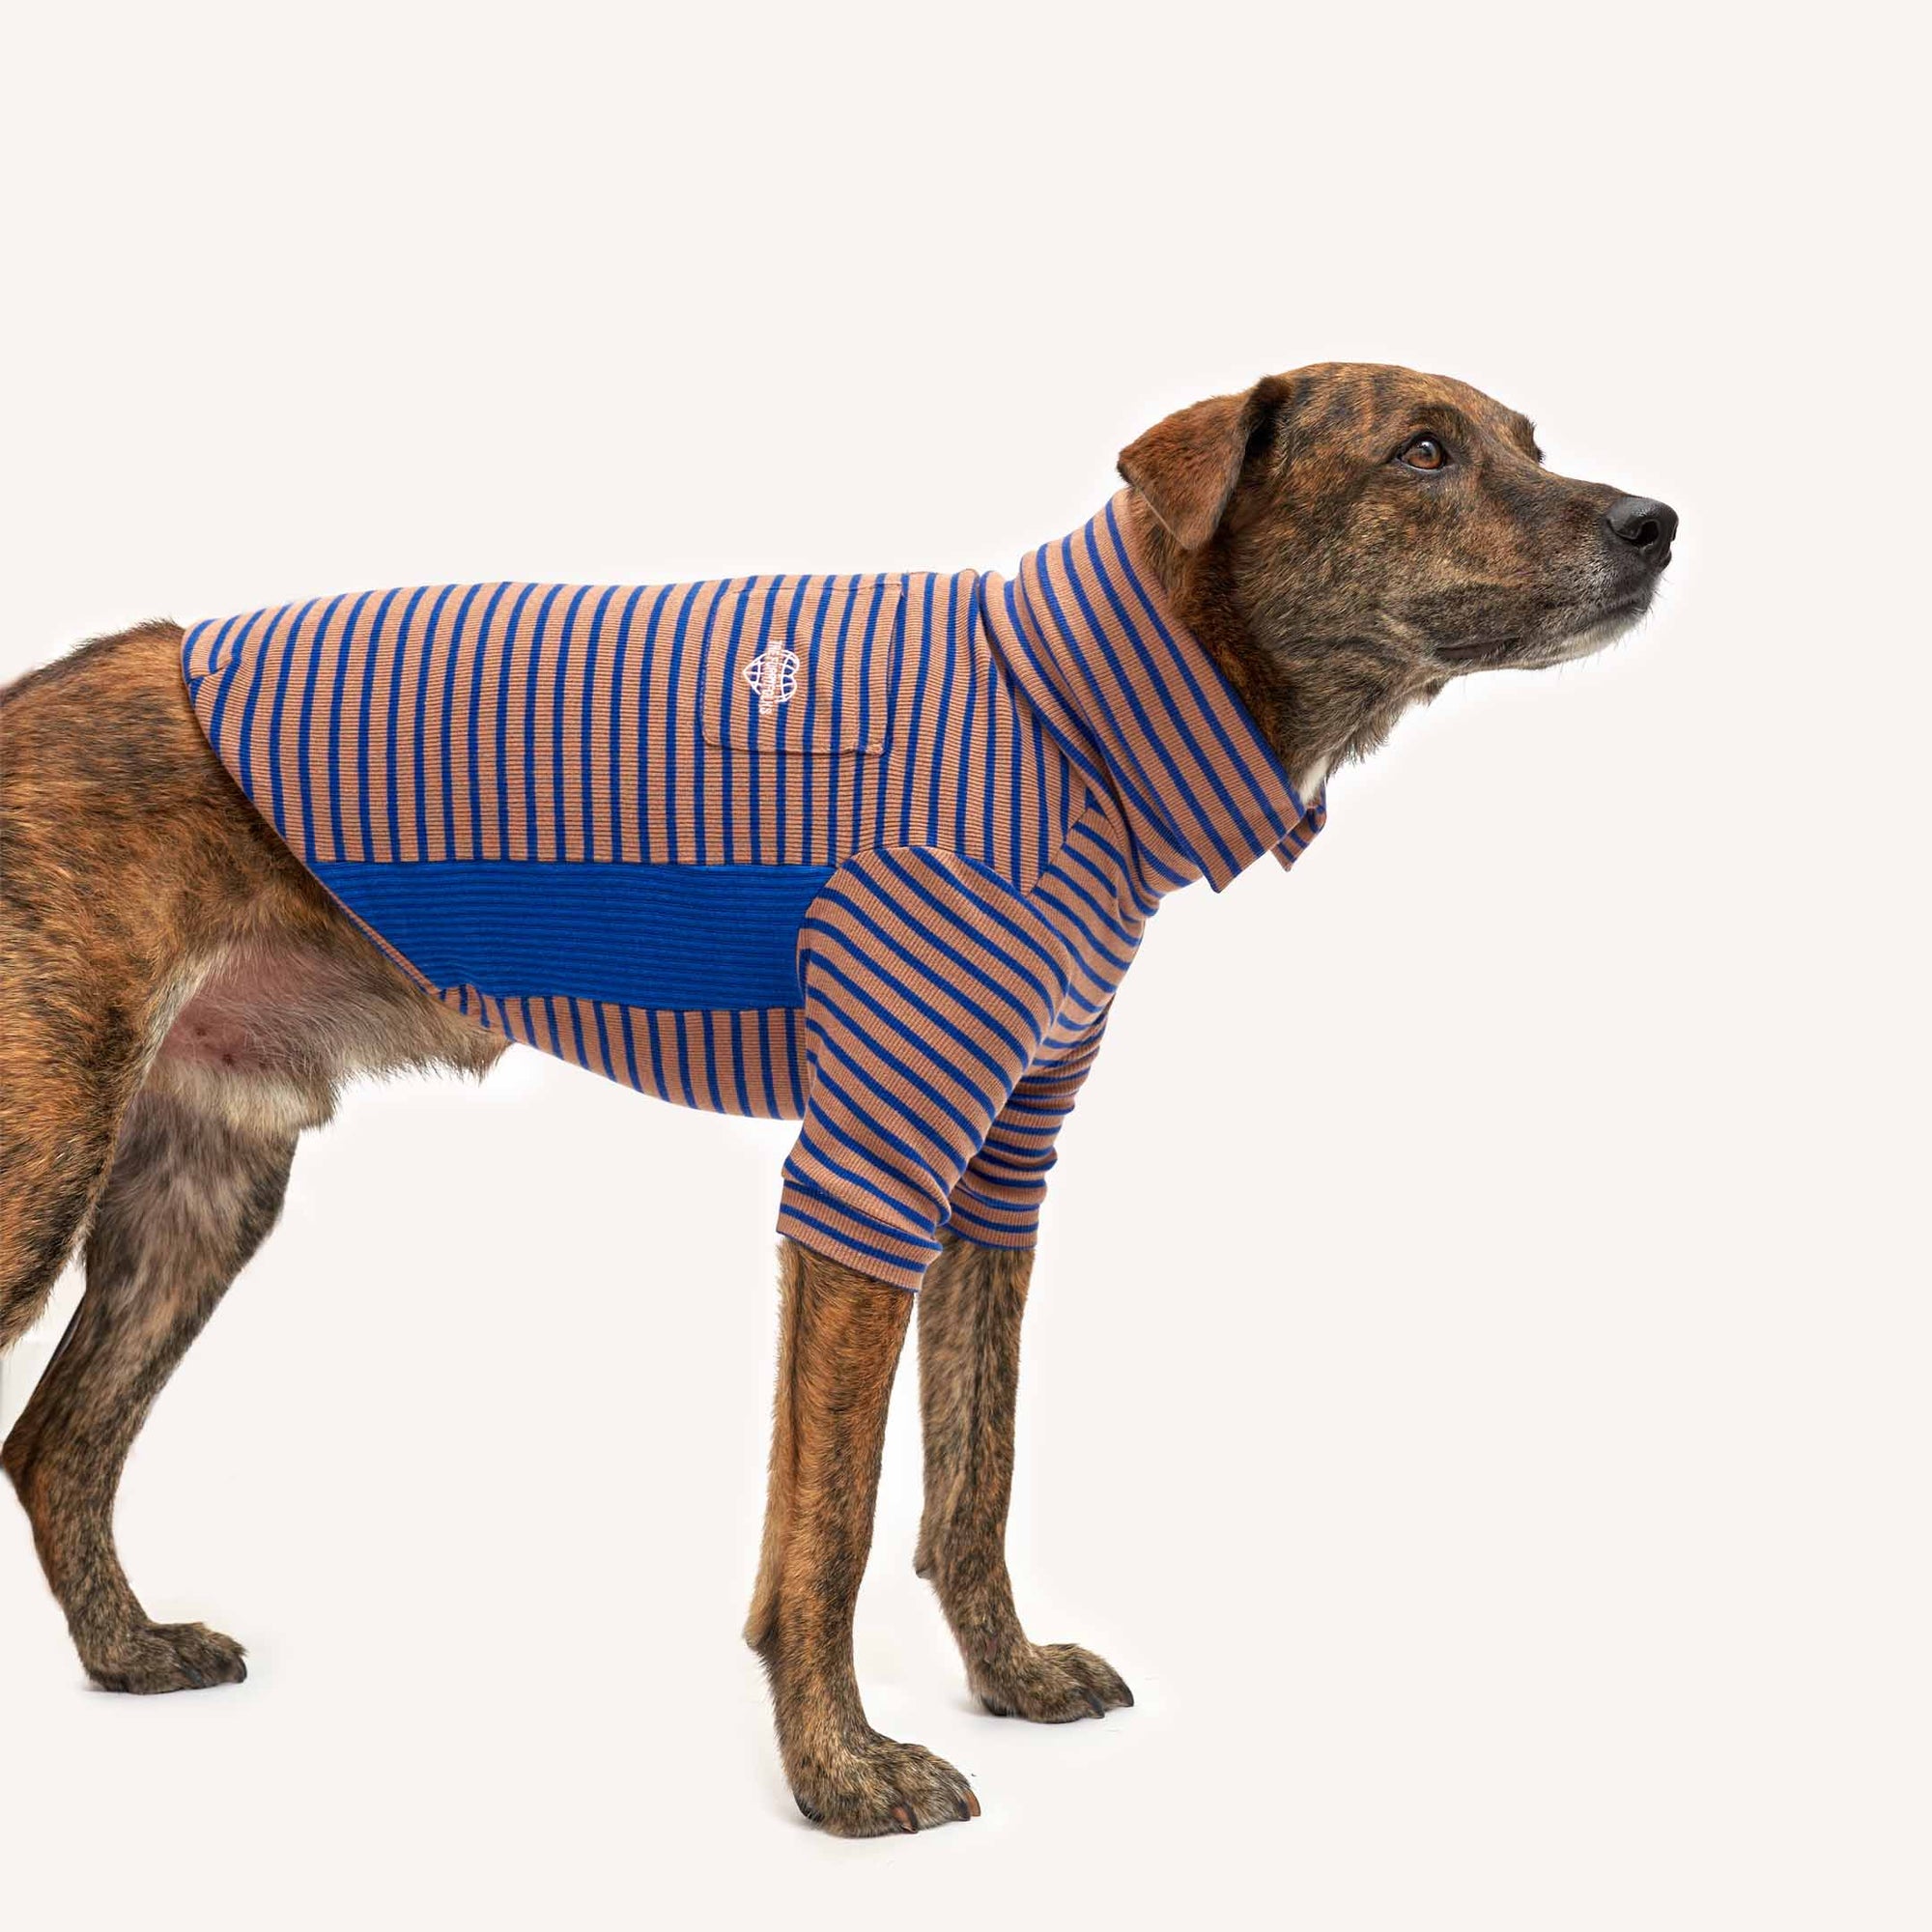 Alert brindle dog donning a fashionable Cobalt and Brown striped shirt, tailored for a comfortable and snug fit.